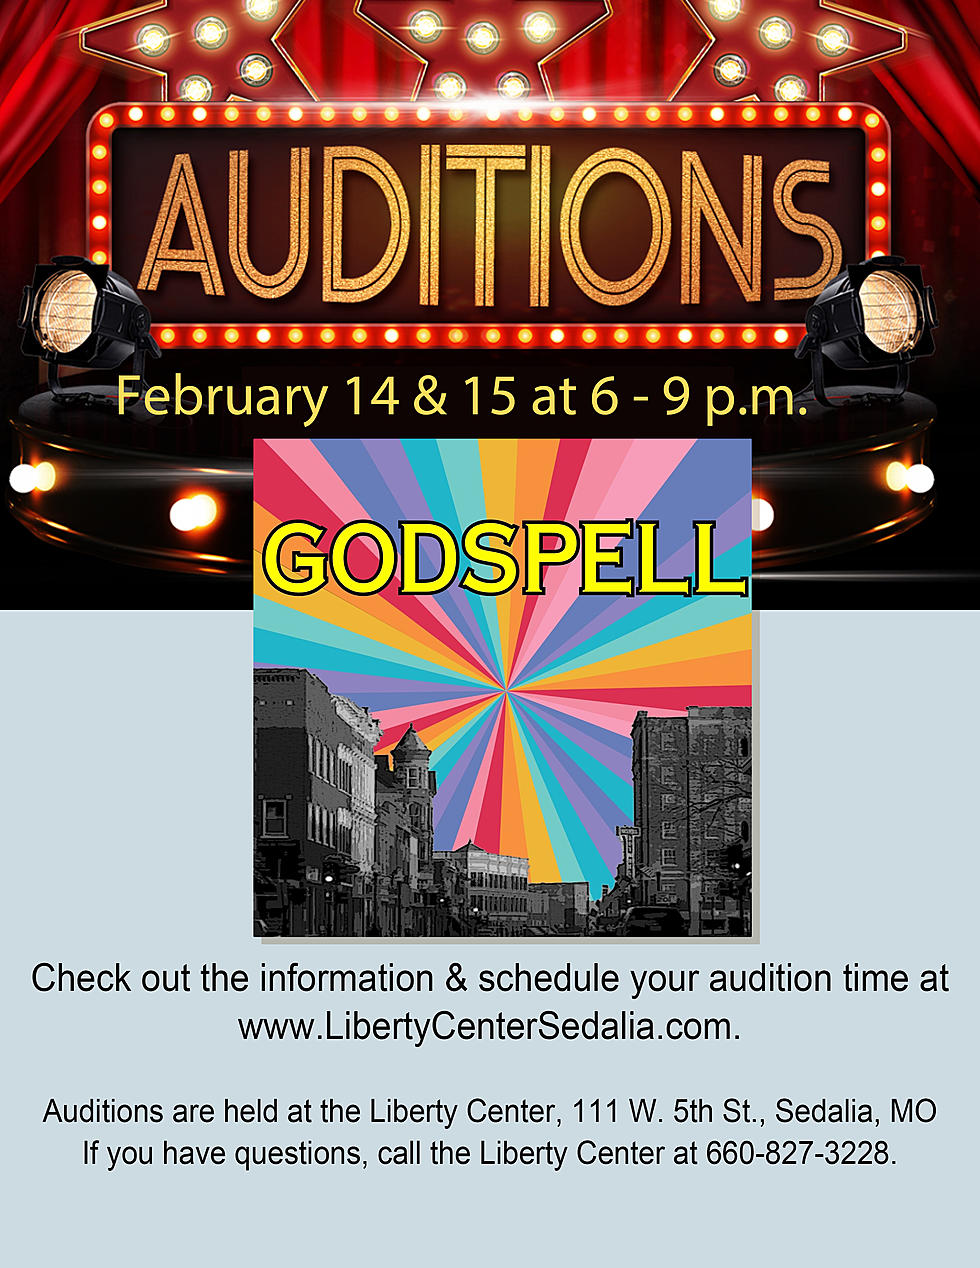 Godspell Auditions Announced at Liberty Center